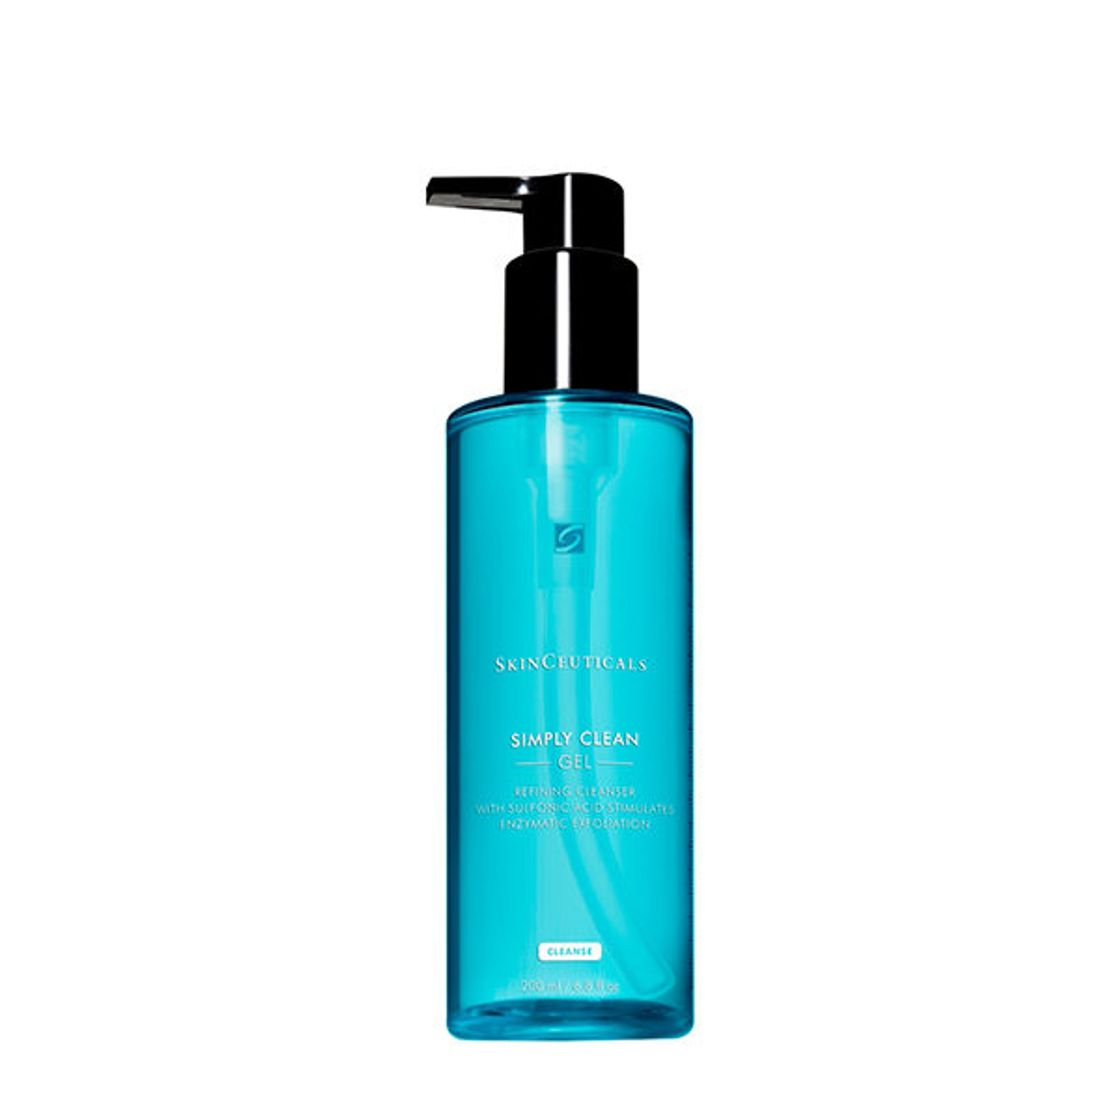 Simply clean skinceuticals